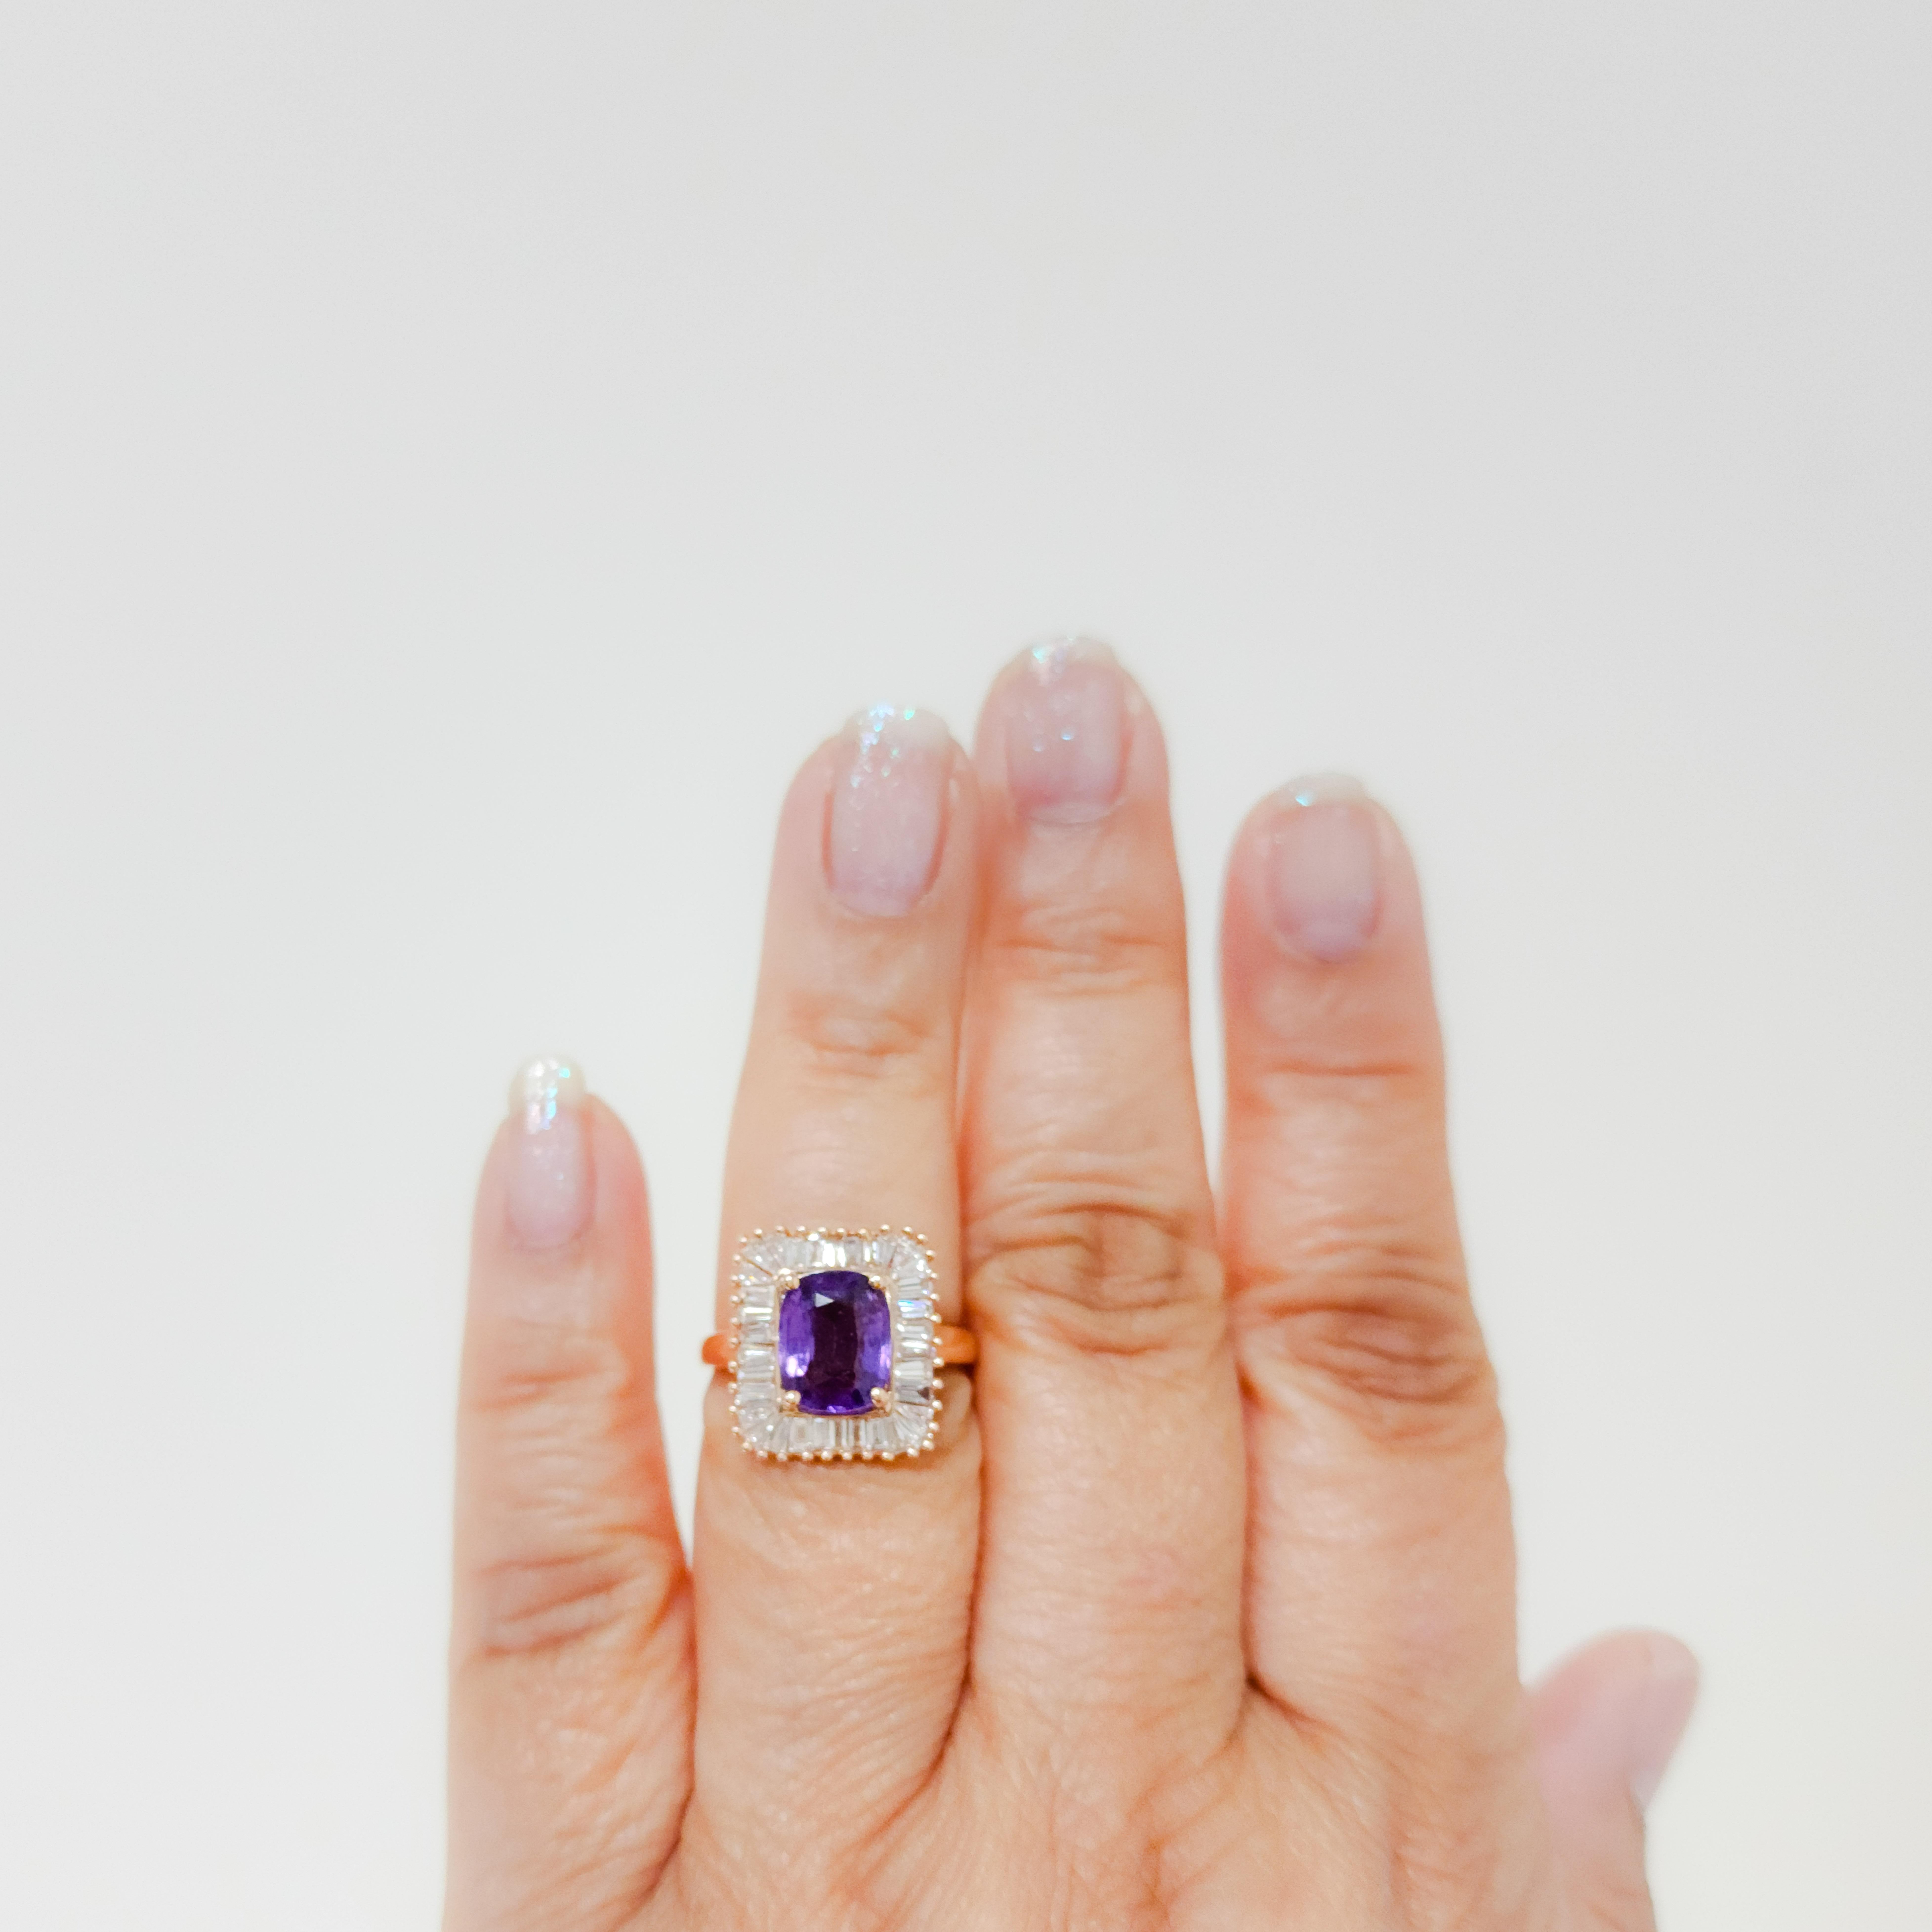 Beautiful 2.81 ct. purple sapphire cushion with 0.90 ct. good quality white diamond baguettes.  Handmade in 14k rose gold.  Ring size 6.75.  GIA certificate included.